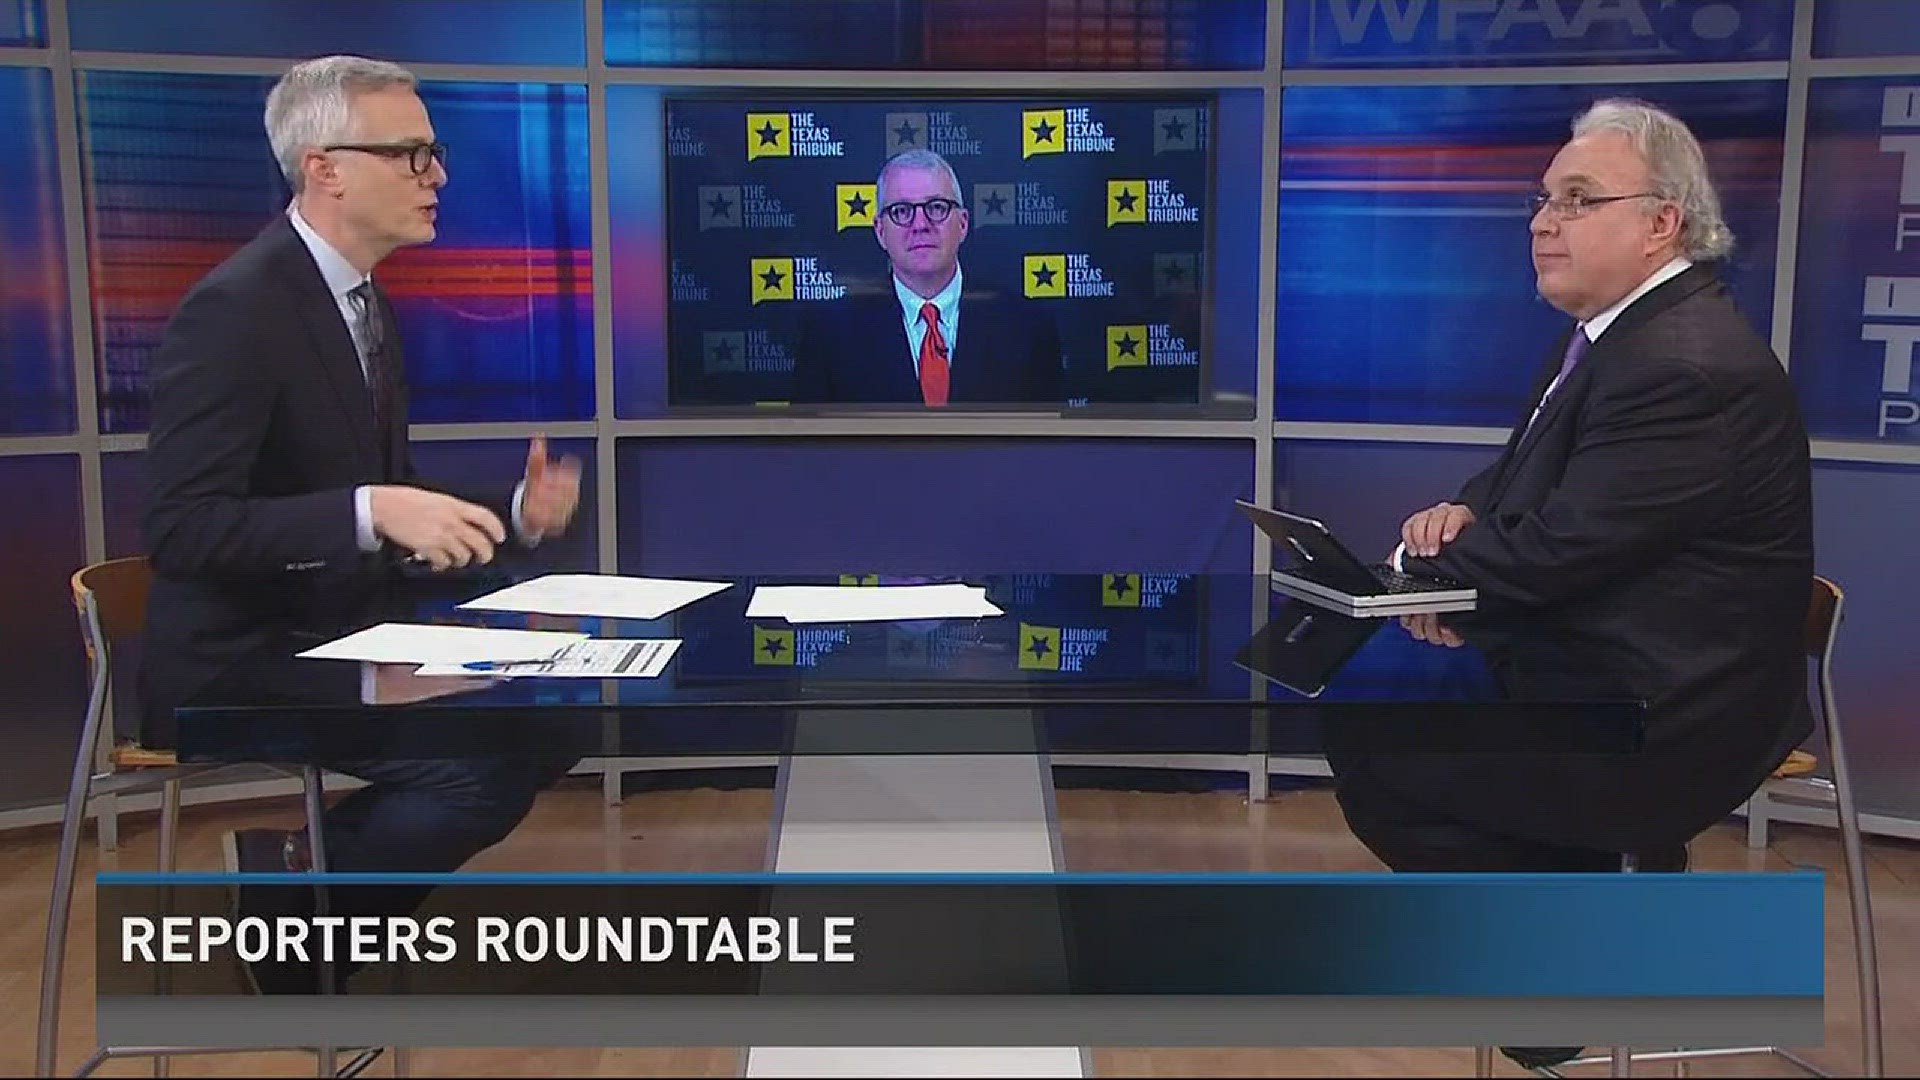 Reporter's roundtable (10/22/17)